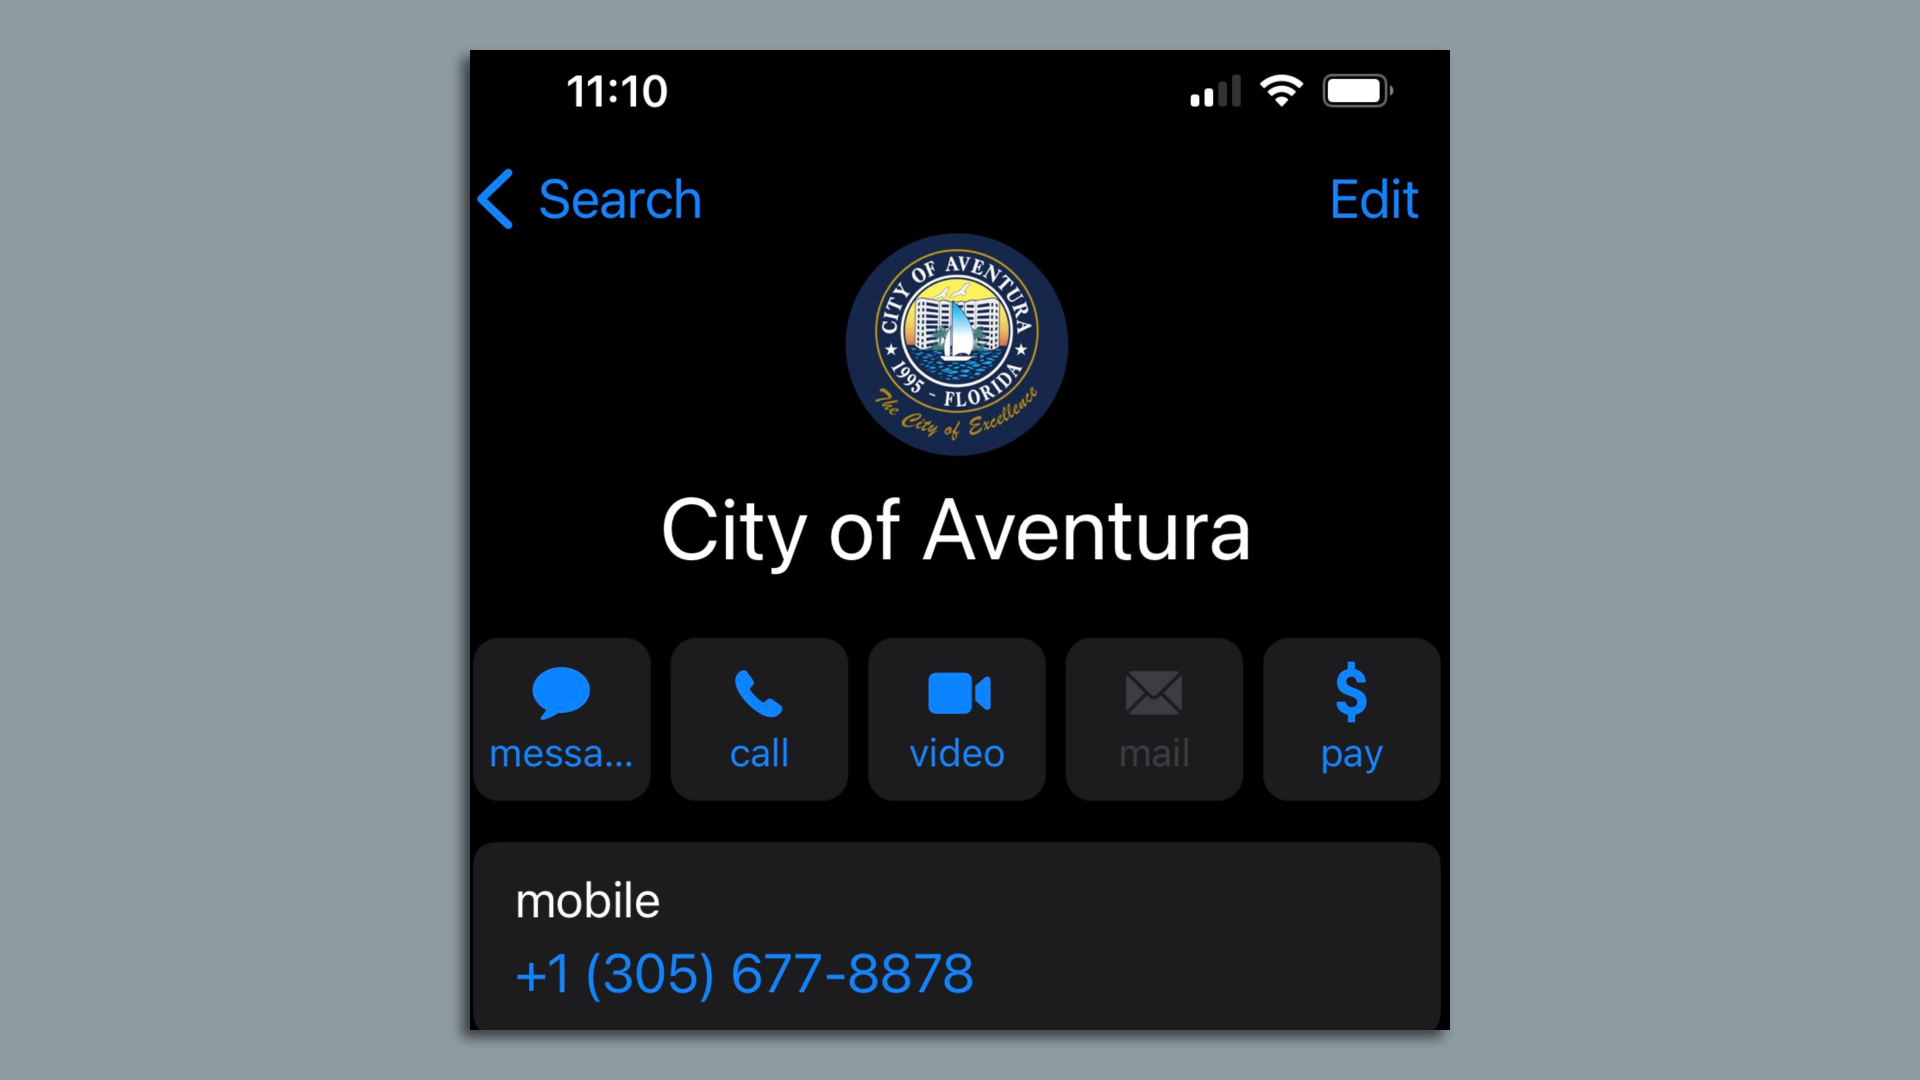 A iPhone contact with "City of Aventura" as the recipient.